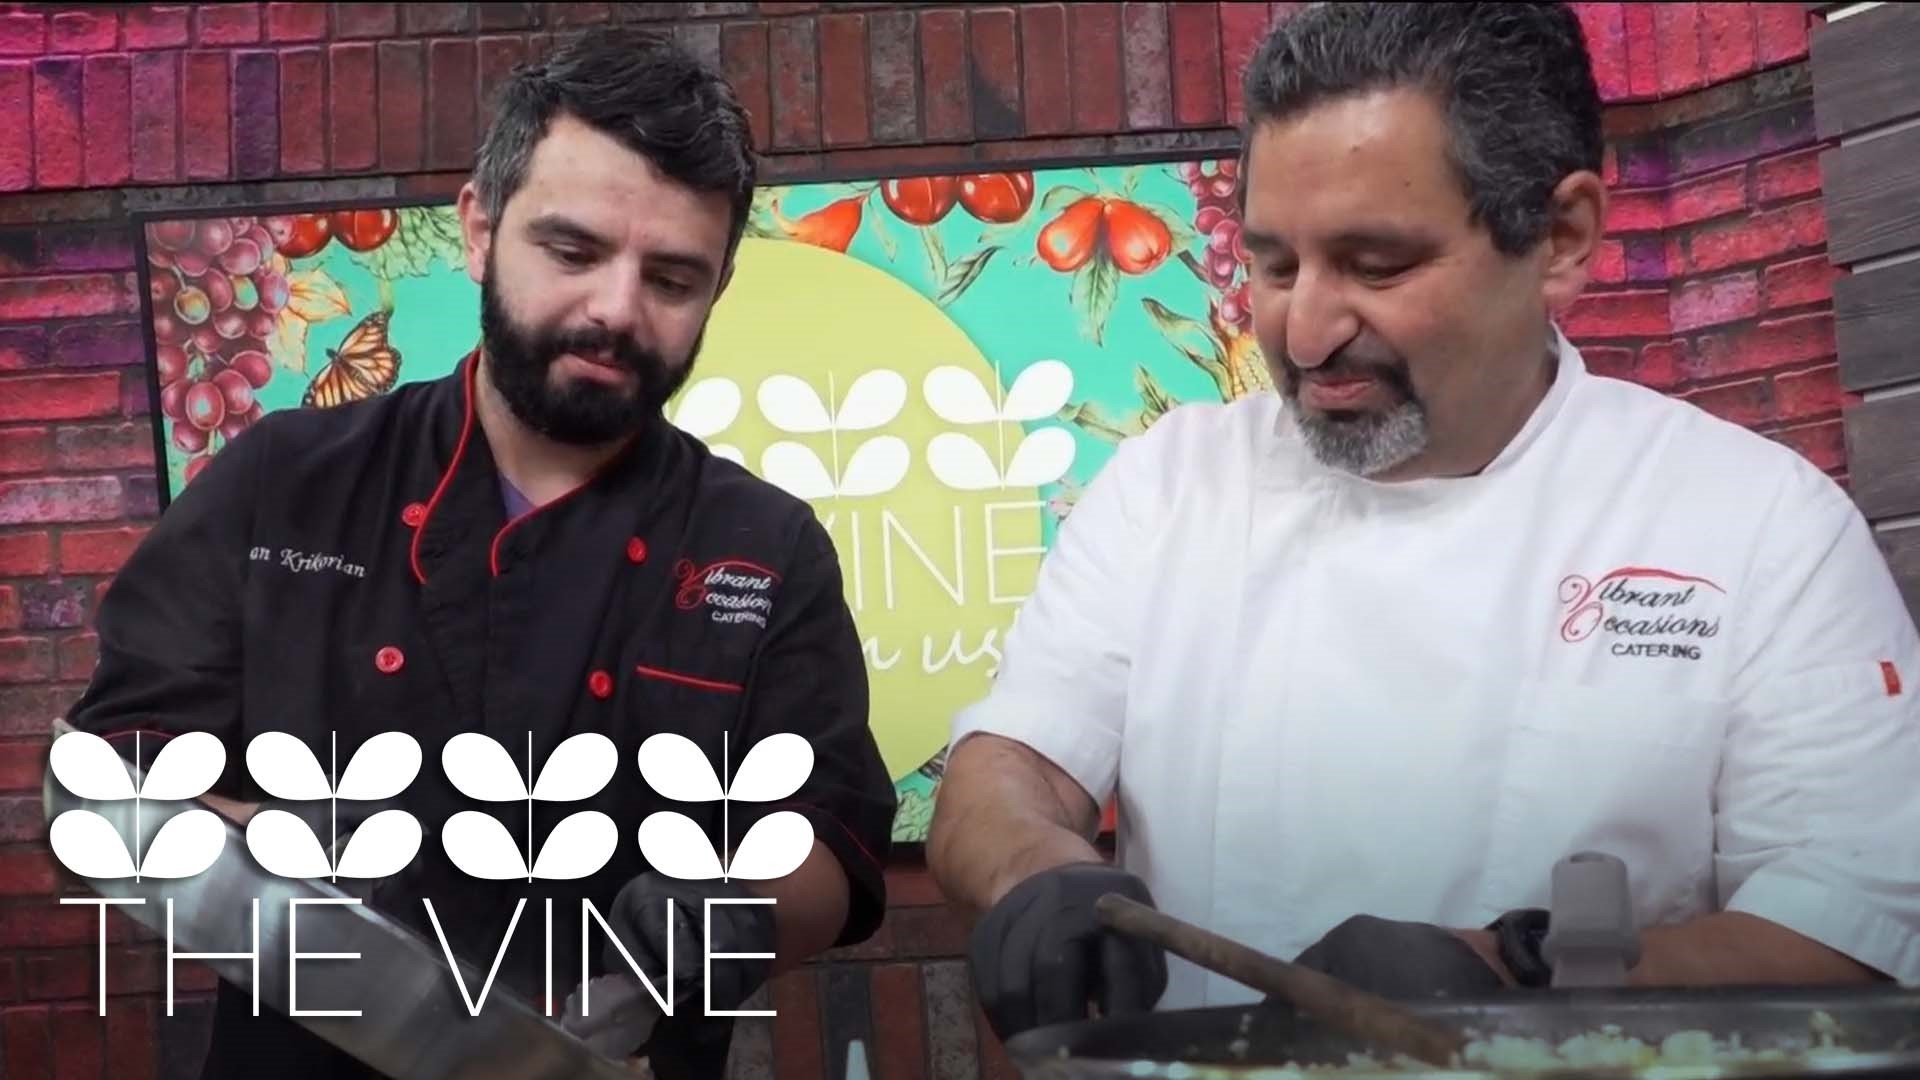 Chef Serge shows us how prepare quick dishes like shrimp scampi, chicken curry, and even chickpea salad.